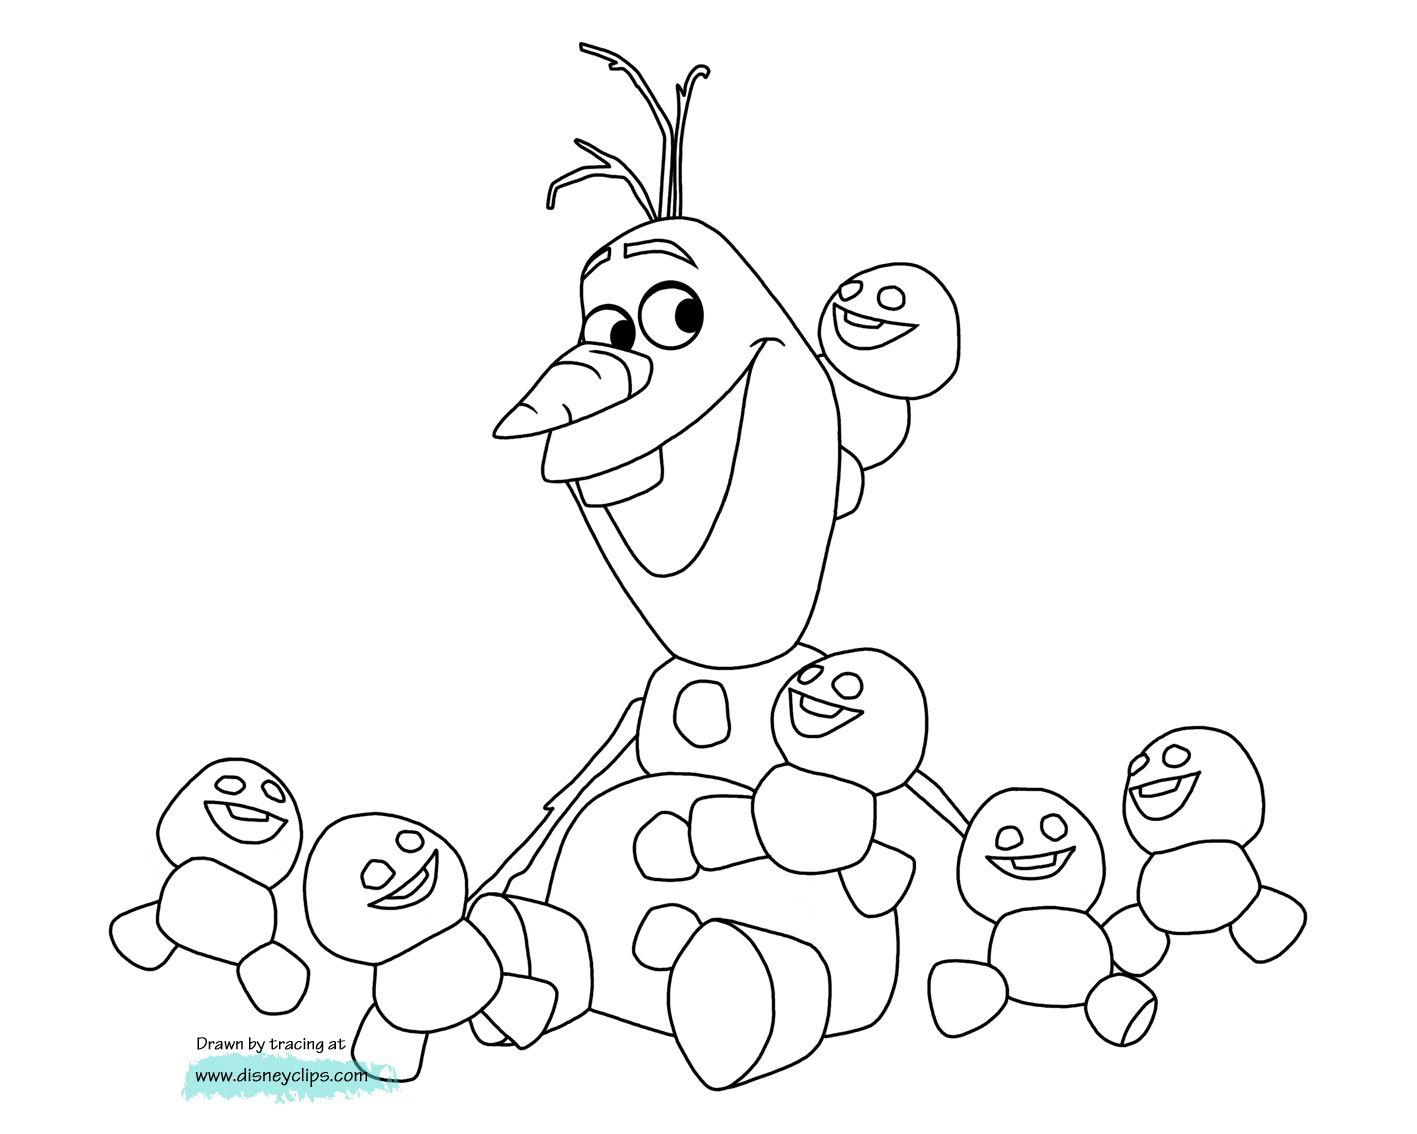 Frozen coloring page to print and color for free : Olaf and the little snowmen